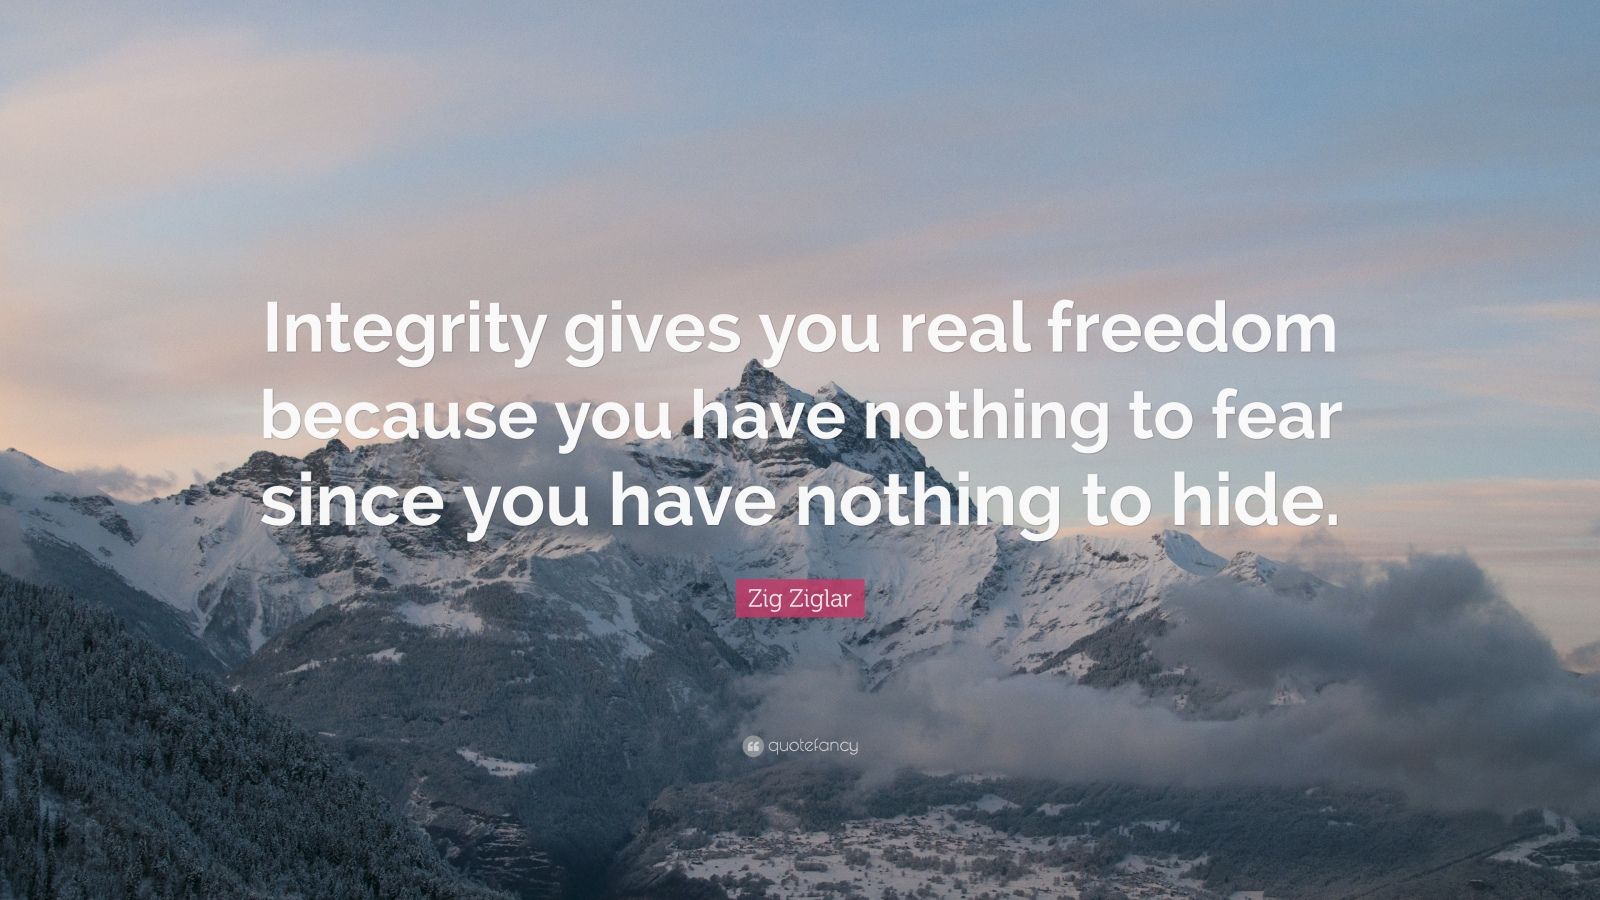 Zig Ziglar Quote: “Integrity gives you real freedom because you have ...